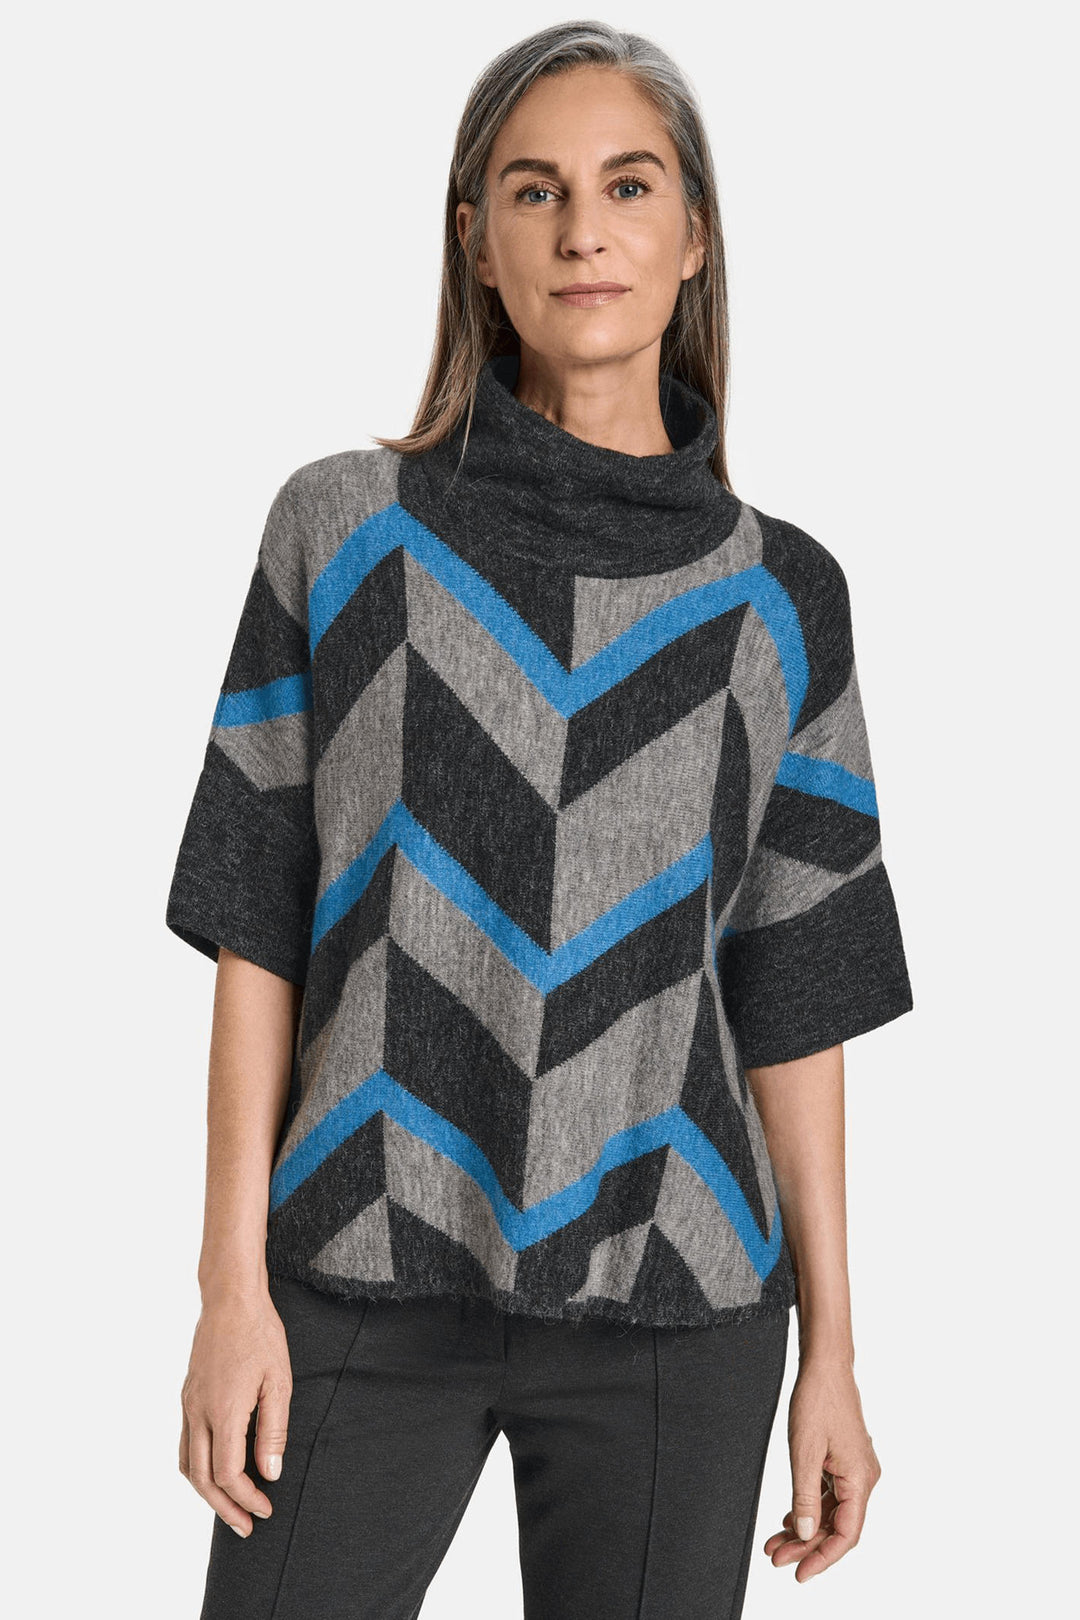 Gerry Weber 170517 Grey & Blue Zig Zag Print Knitted Jumper - Experience Boutique